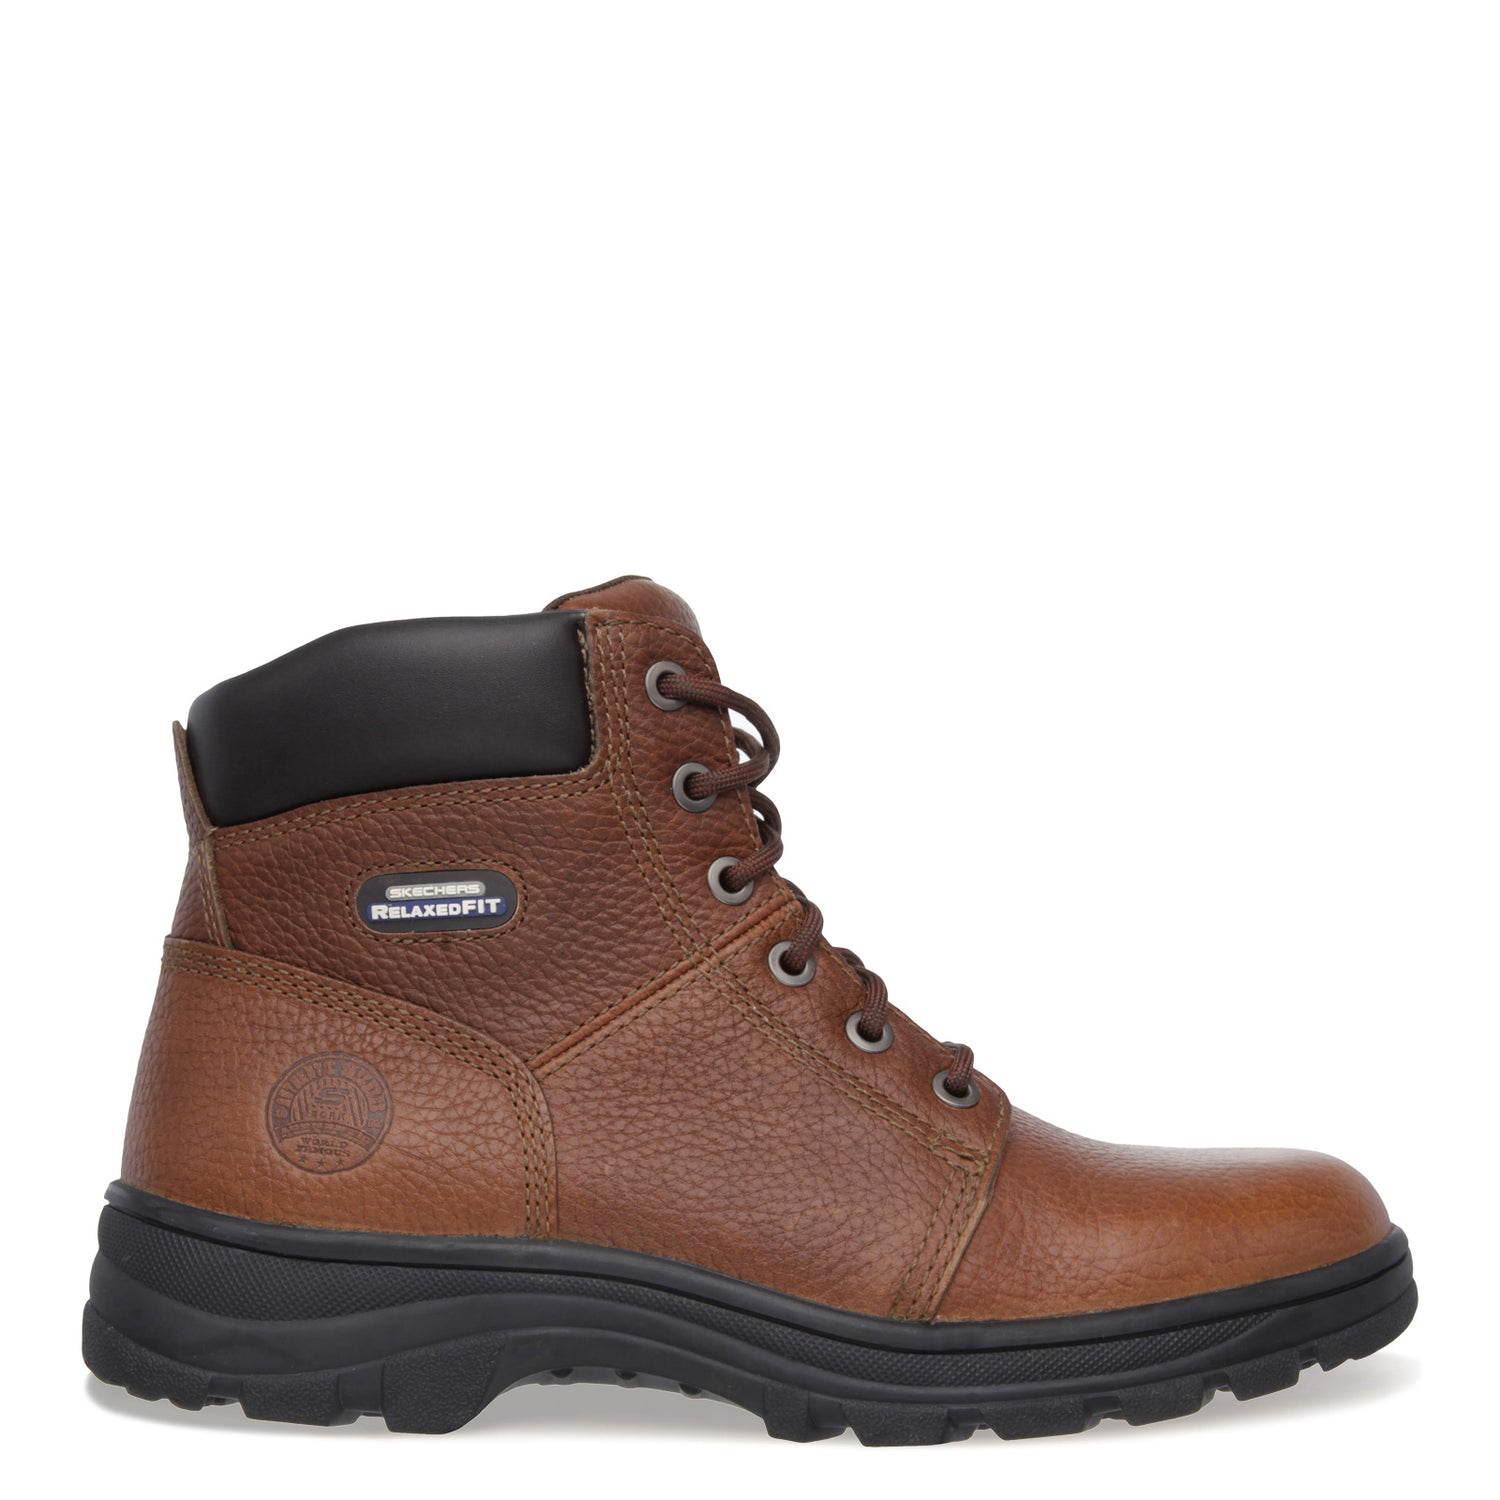 Peltz Shoes  Men's Skechers Relaxed Fit: Workshire - Condor Work Boot BROWN LEATHER 77010-BRN